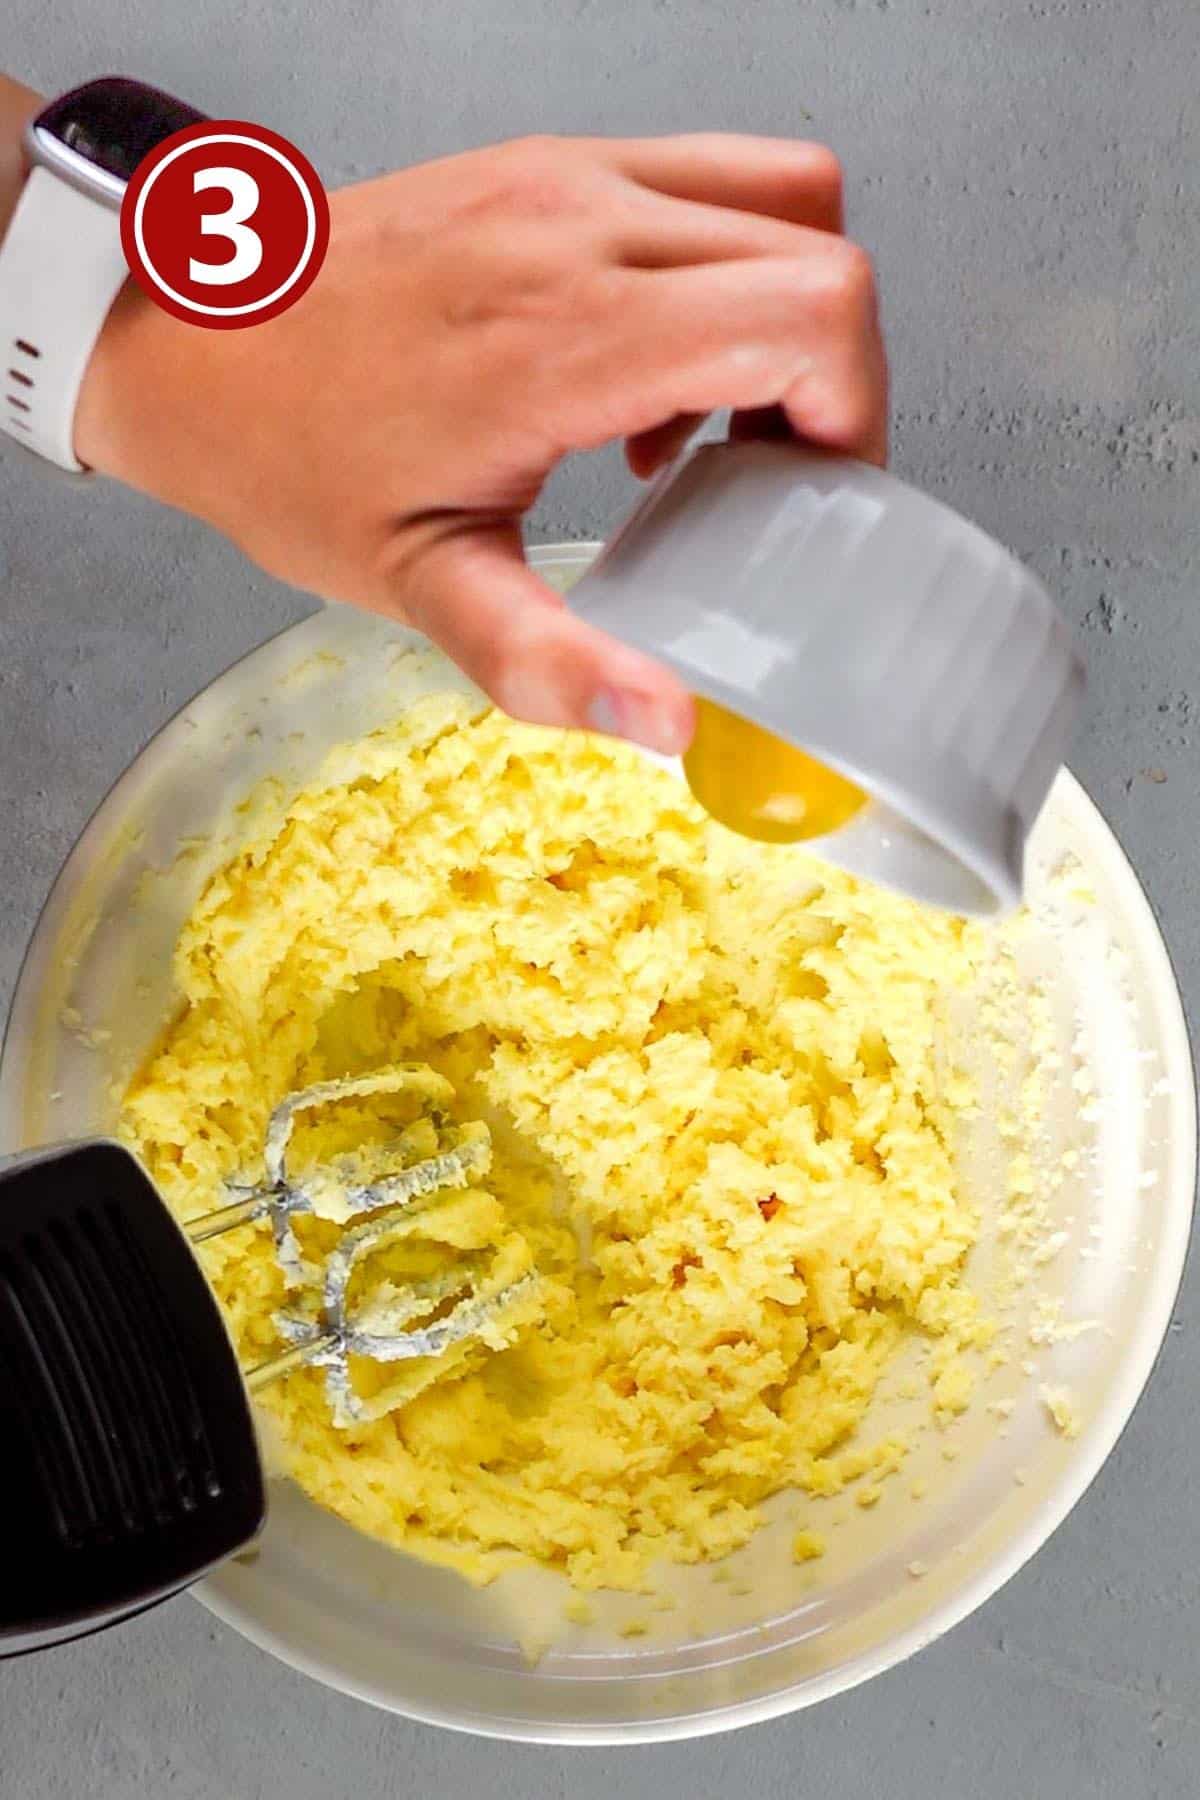 adding the egg yolks into the butter and sugar mixture.